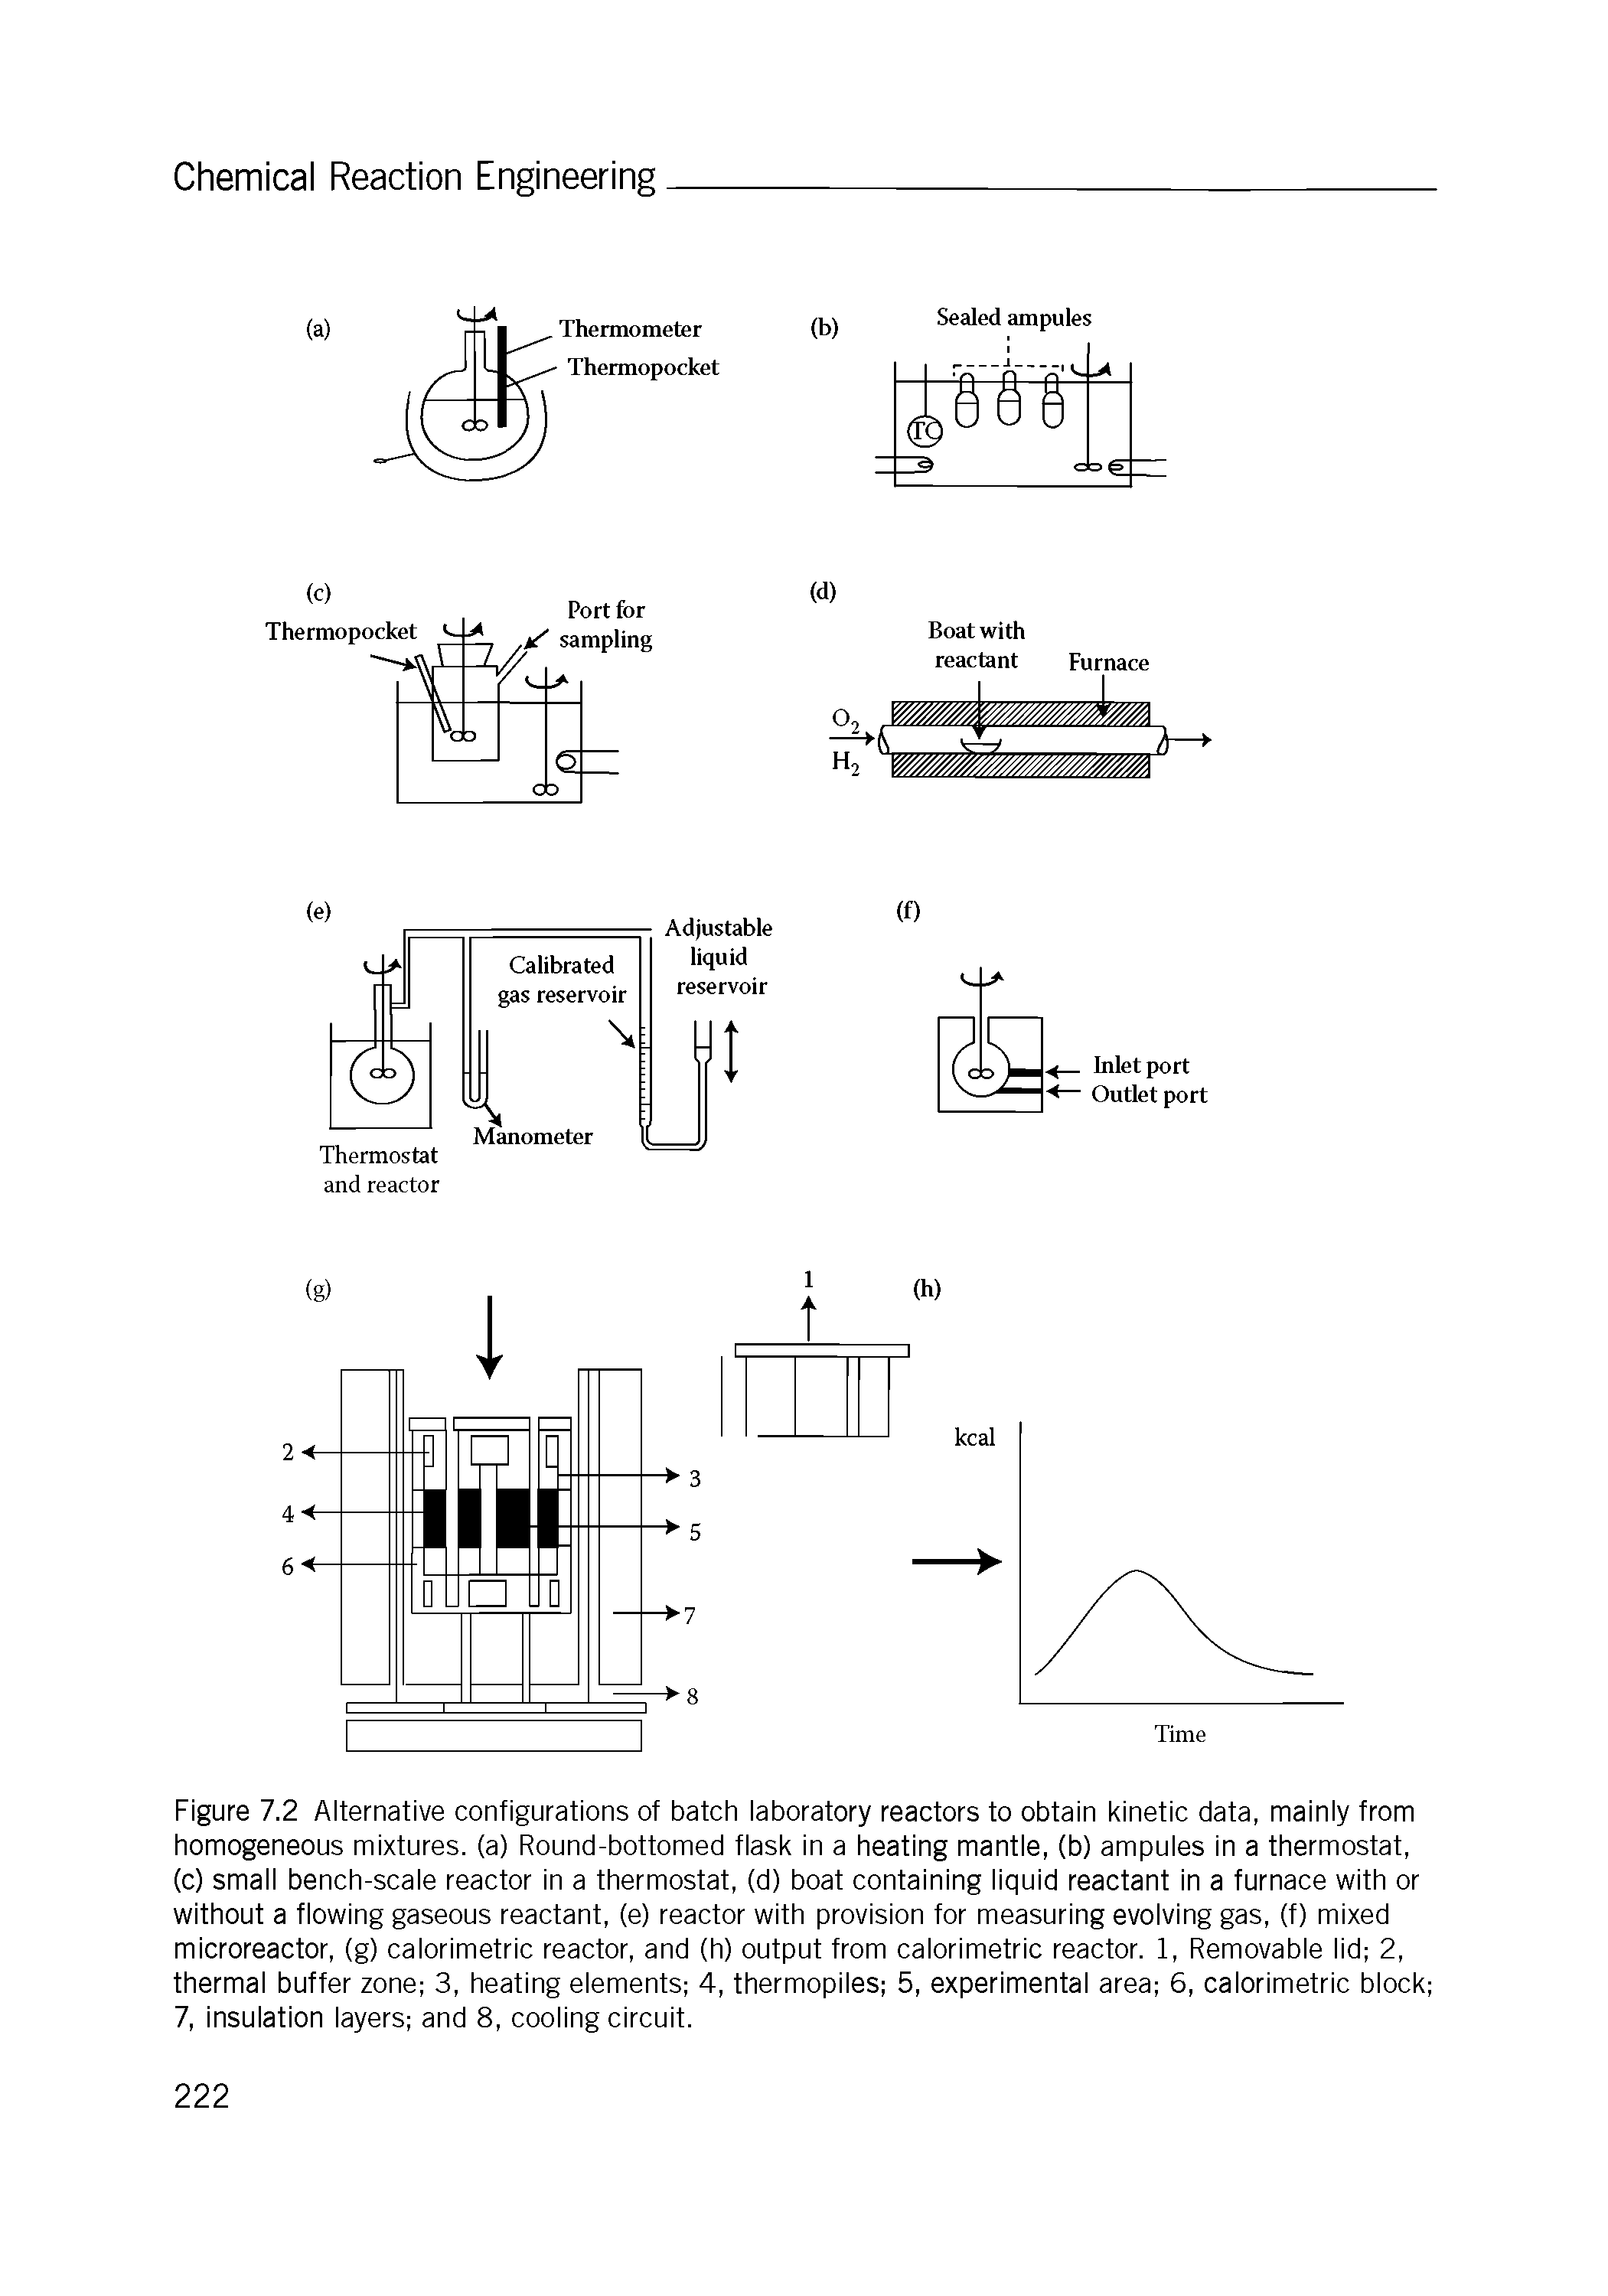 Figure 7.2 Alternative configurations of batch laboratory reactors to obtain kinetic data, mainly from homogeneous mixtures, (a) Round-bottomed flask in a heating mantle, (b) ampules in a thermostat, (c) small bench-scale reactor in a thermostat, (d) boat containing liquid reactant in a furnace with or without a flowing gaseous reactant, (e) reactor with provision for measuring evolving gas, (f) mixed microreactor, (g) calorimetric reactor, and (h) output from calorimetric reactor. 1, Removable lid 2, thermal buffer zone 3, heating elements 4, thermopiles 5, experimental area 6, calorimetric block 7, insulation layers and 8, cooling circuit.